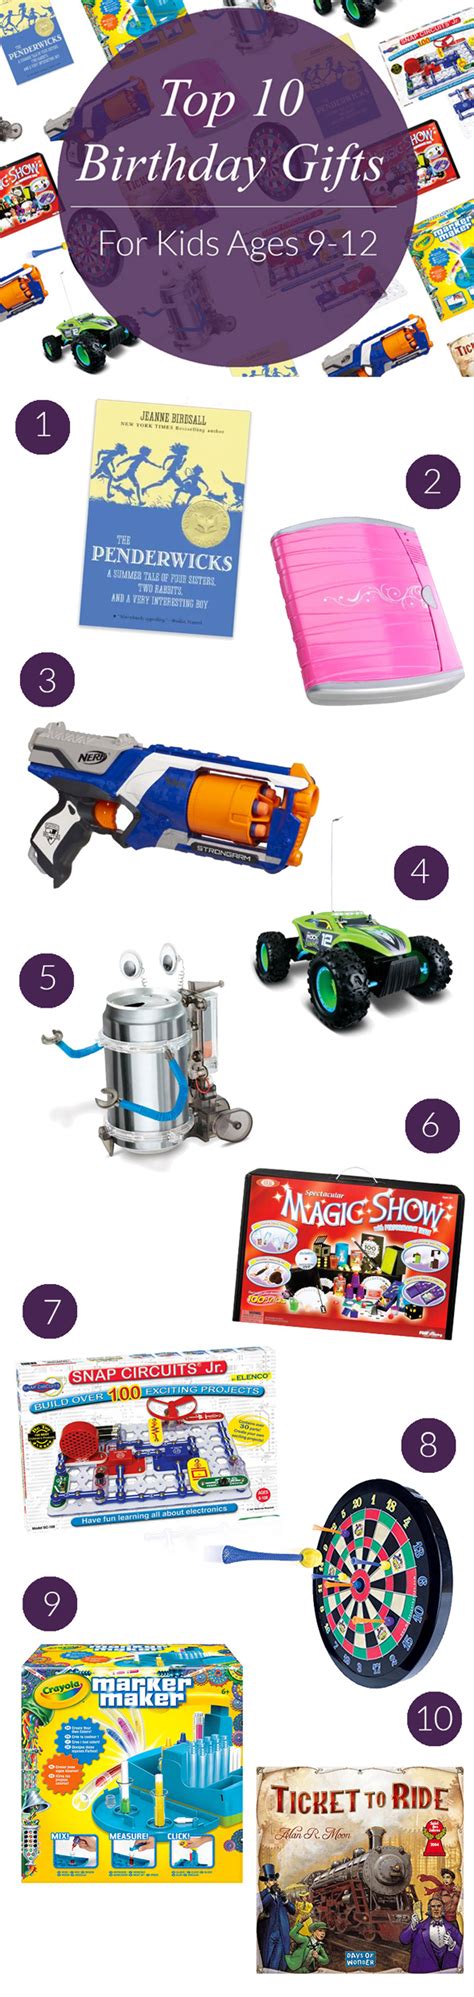 Birthday gifts for boys kids. Top 10 Birthday Gifts for Kids Ages 9-12 - Evite